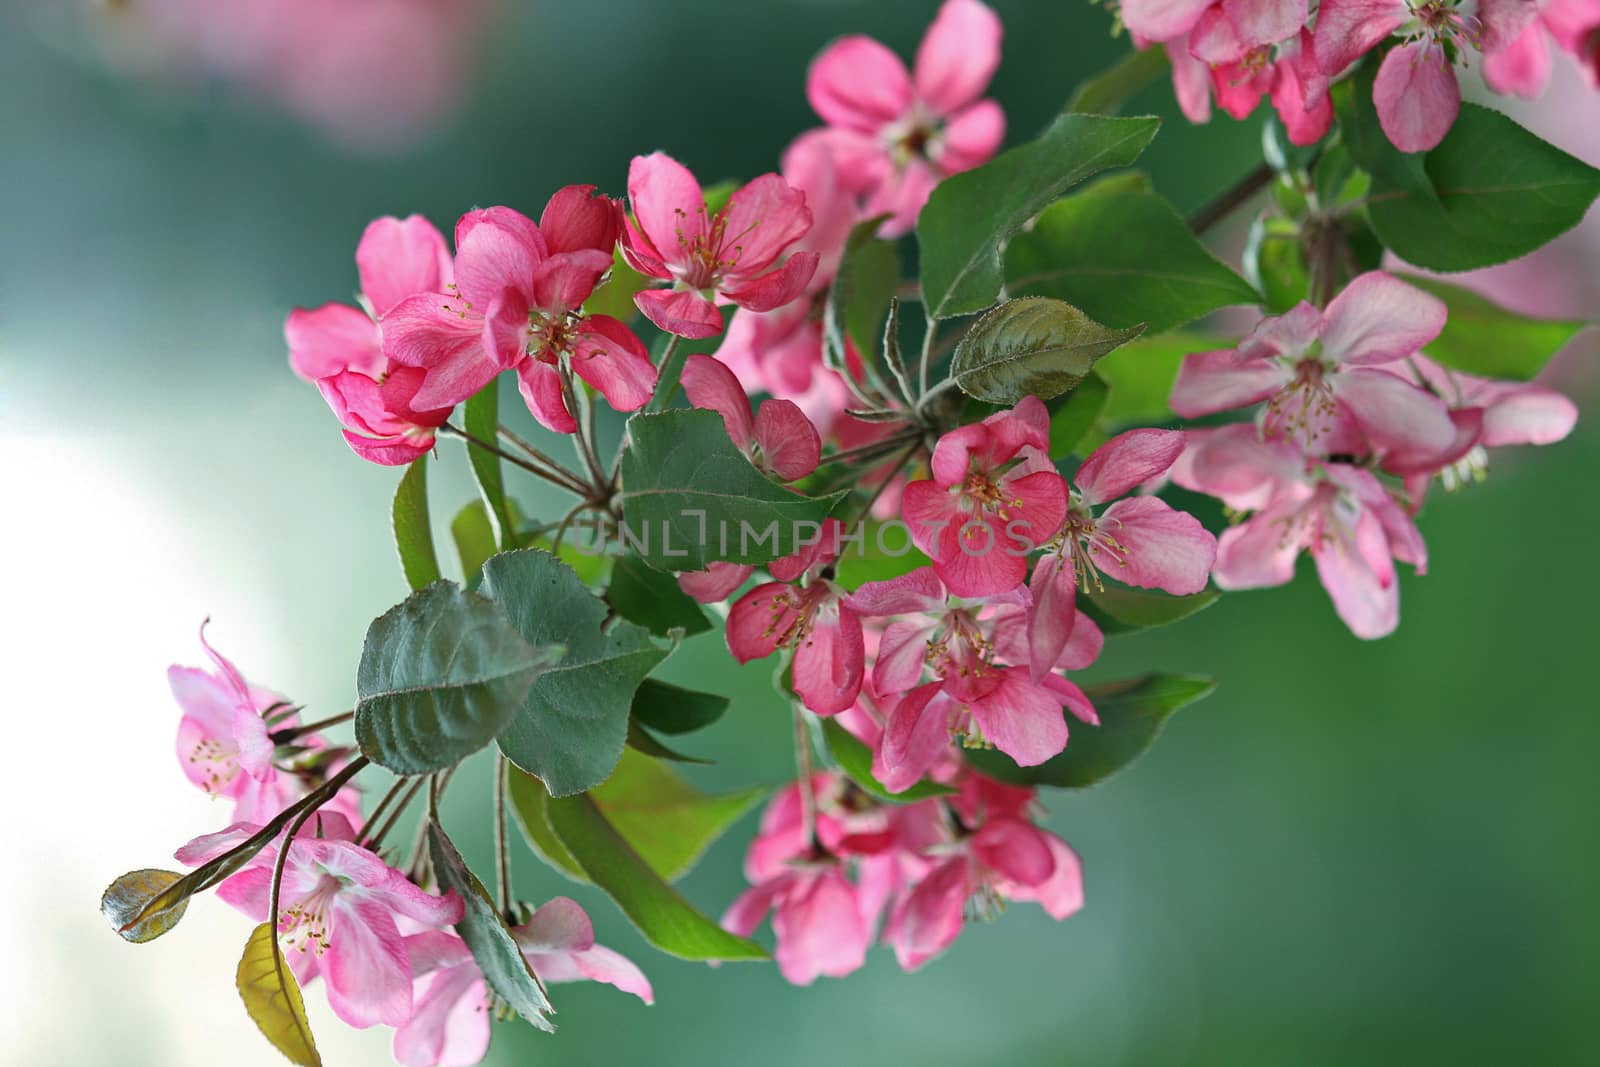 flowering branch of a fruit tree, pink cherry flowers on a white-green blurred background